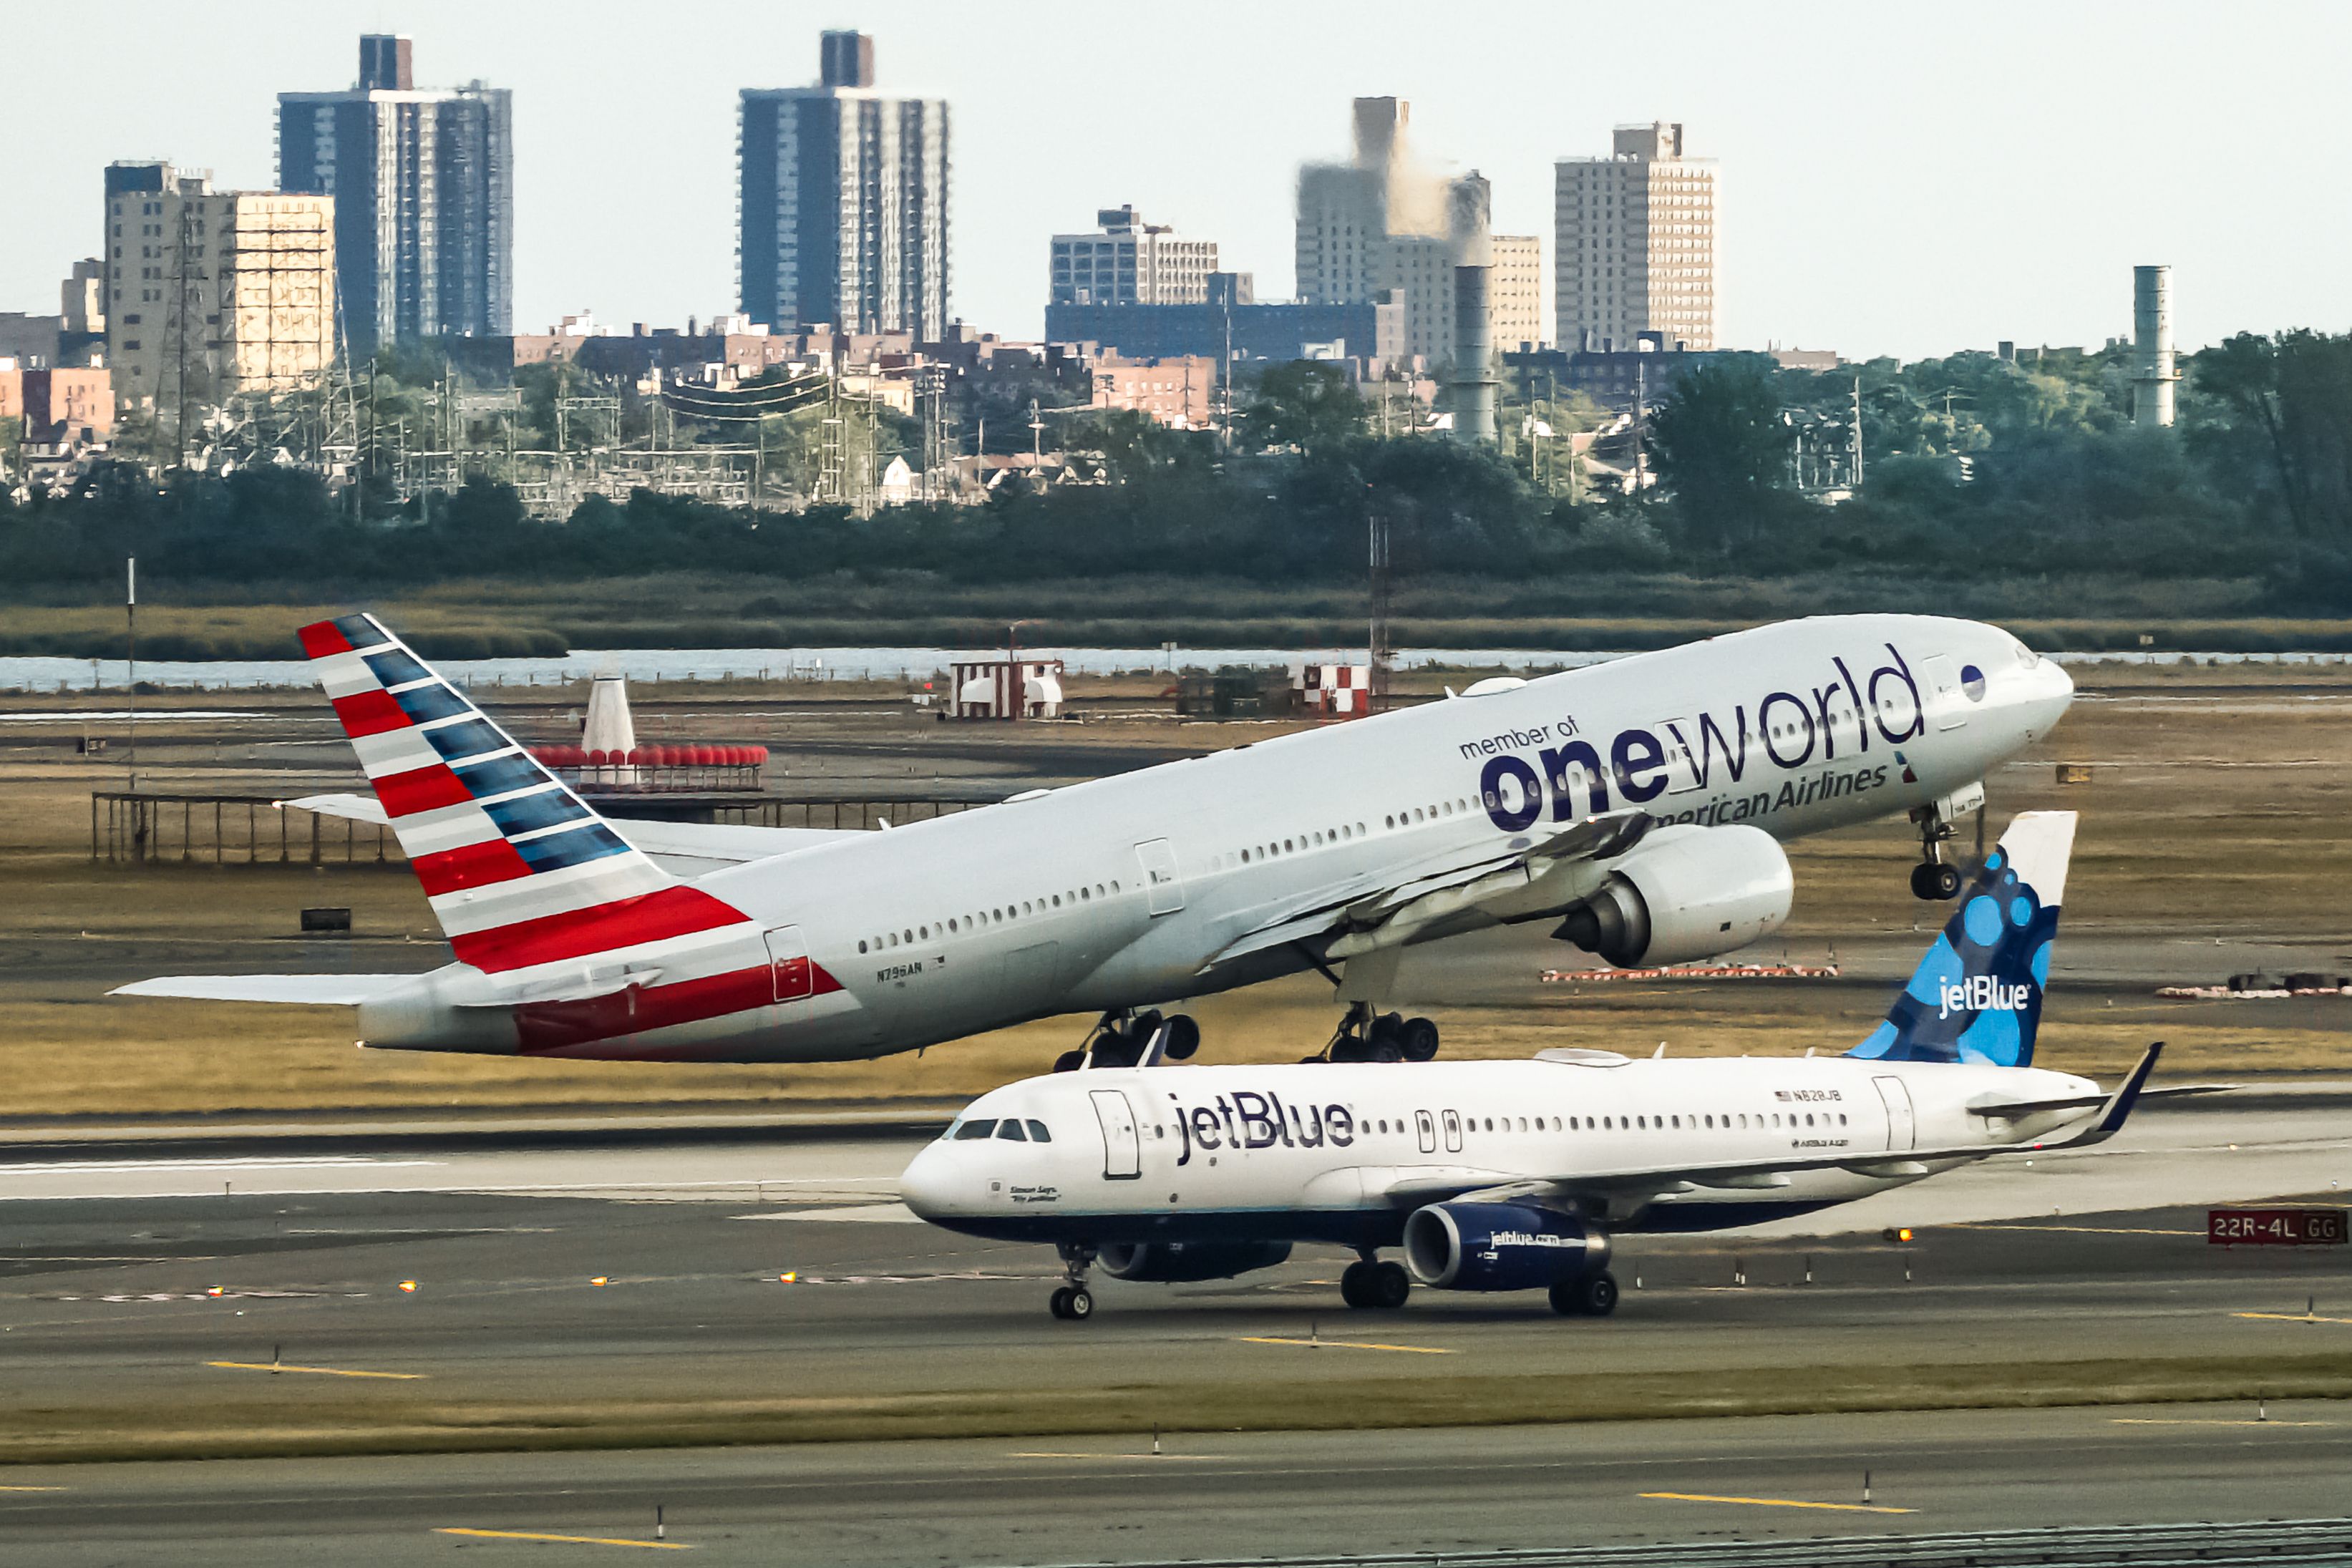 A JetBlue Airbus A320 on the airport apron as an American Airlines Boeing 777 in oneworld livery takes off in the foreground.